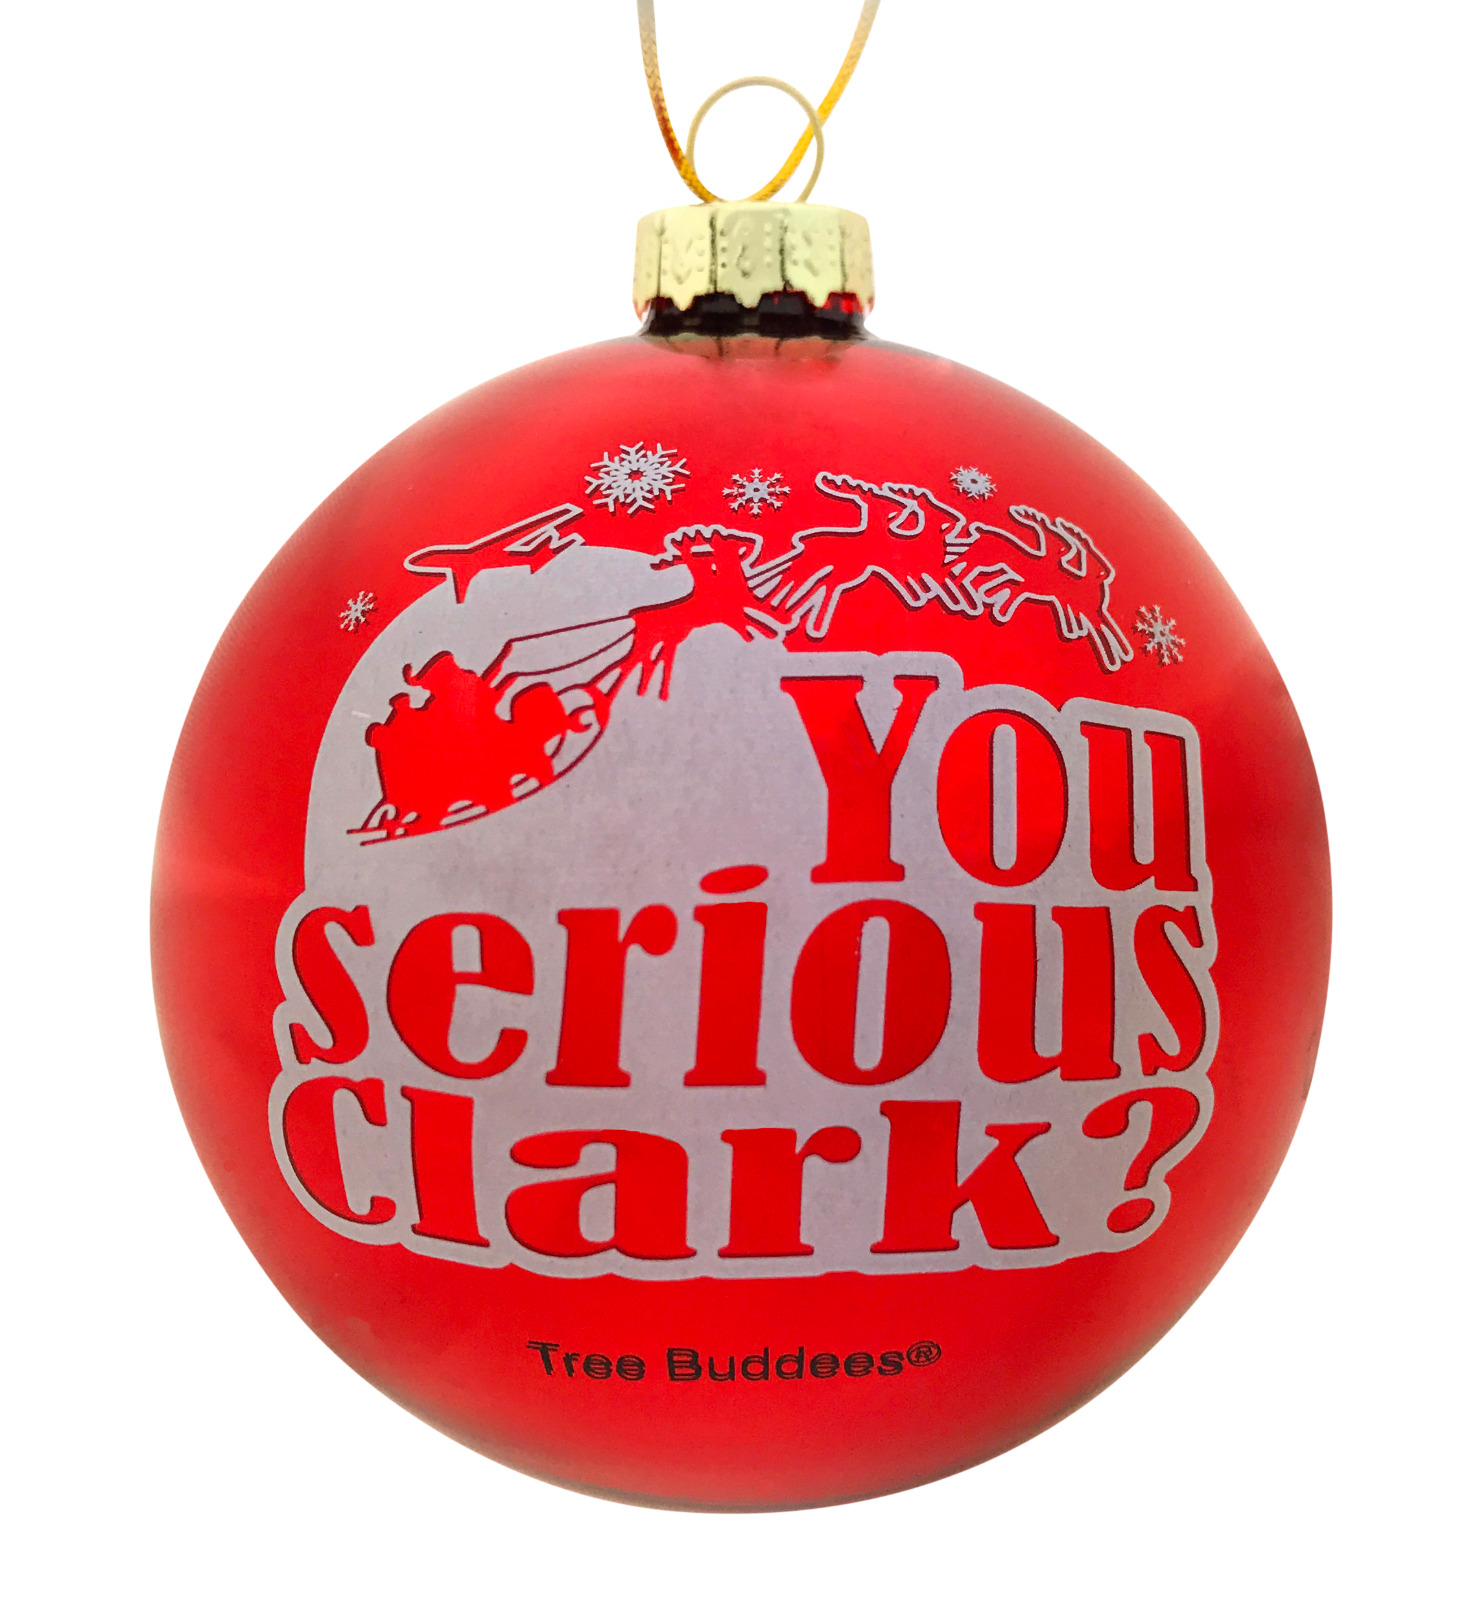 Tree Buddees You Serious Clark? Red Glass Christmas Vacation Ornament Ornaments